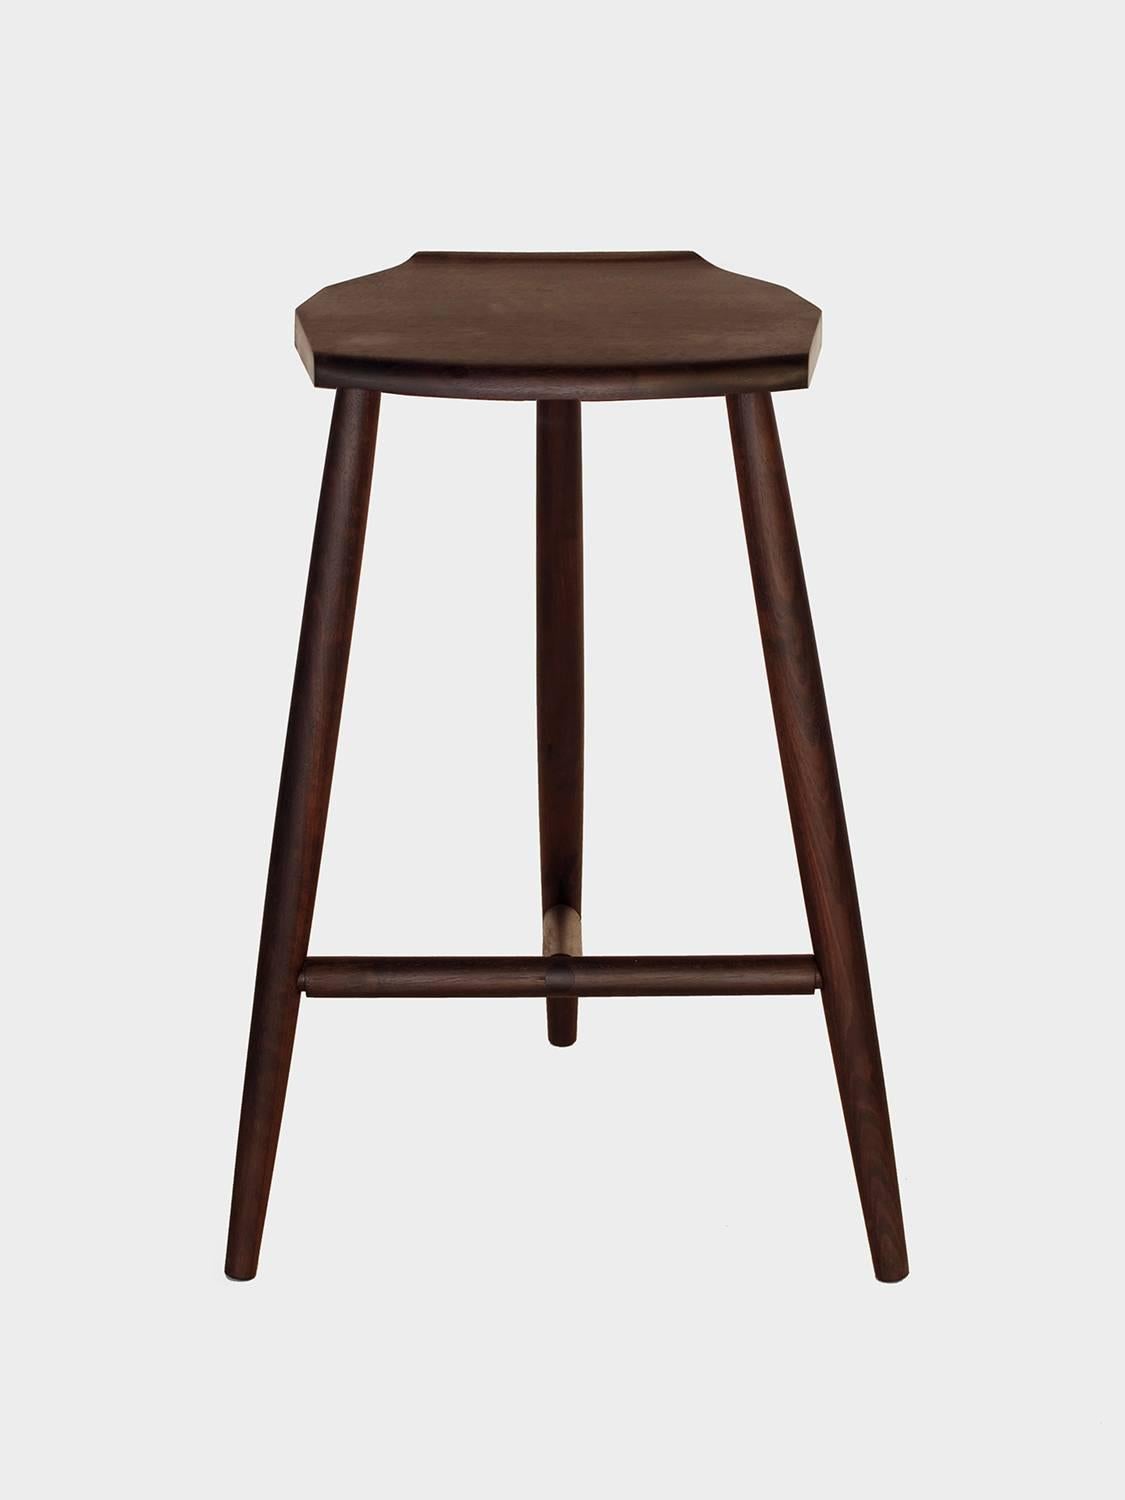 New York Heartwoods' ebonized walnut solid wood counter-height Jordan Stool is influenced by Shaker and Mid-Century design; created to be comfortable, light and easy to move; and features three turned legs, a unique hand-carved faceted seat, and